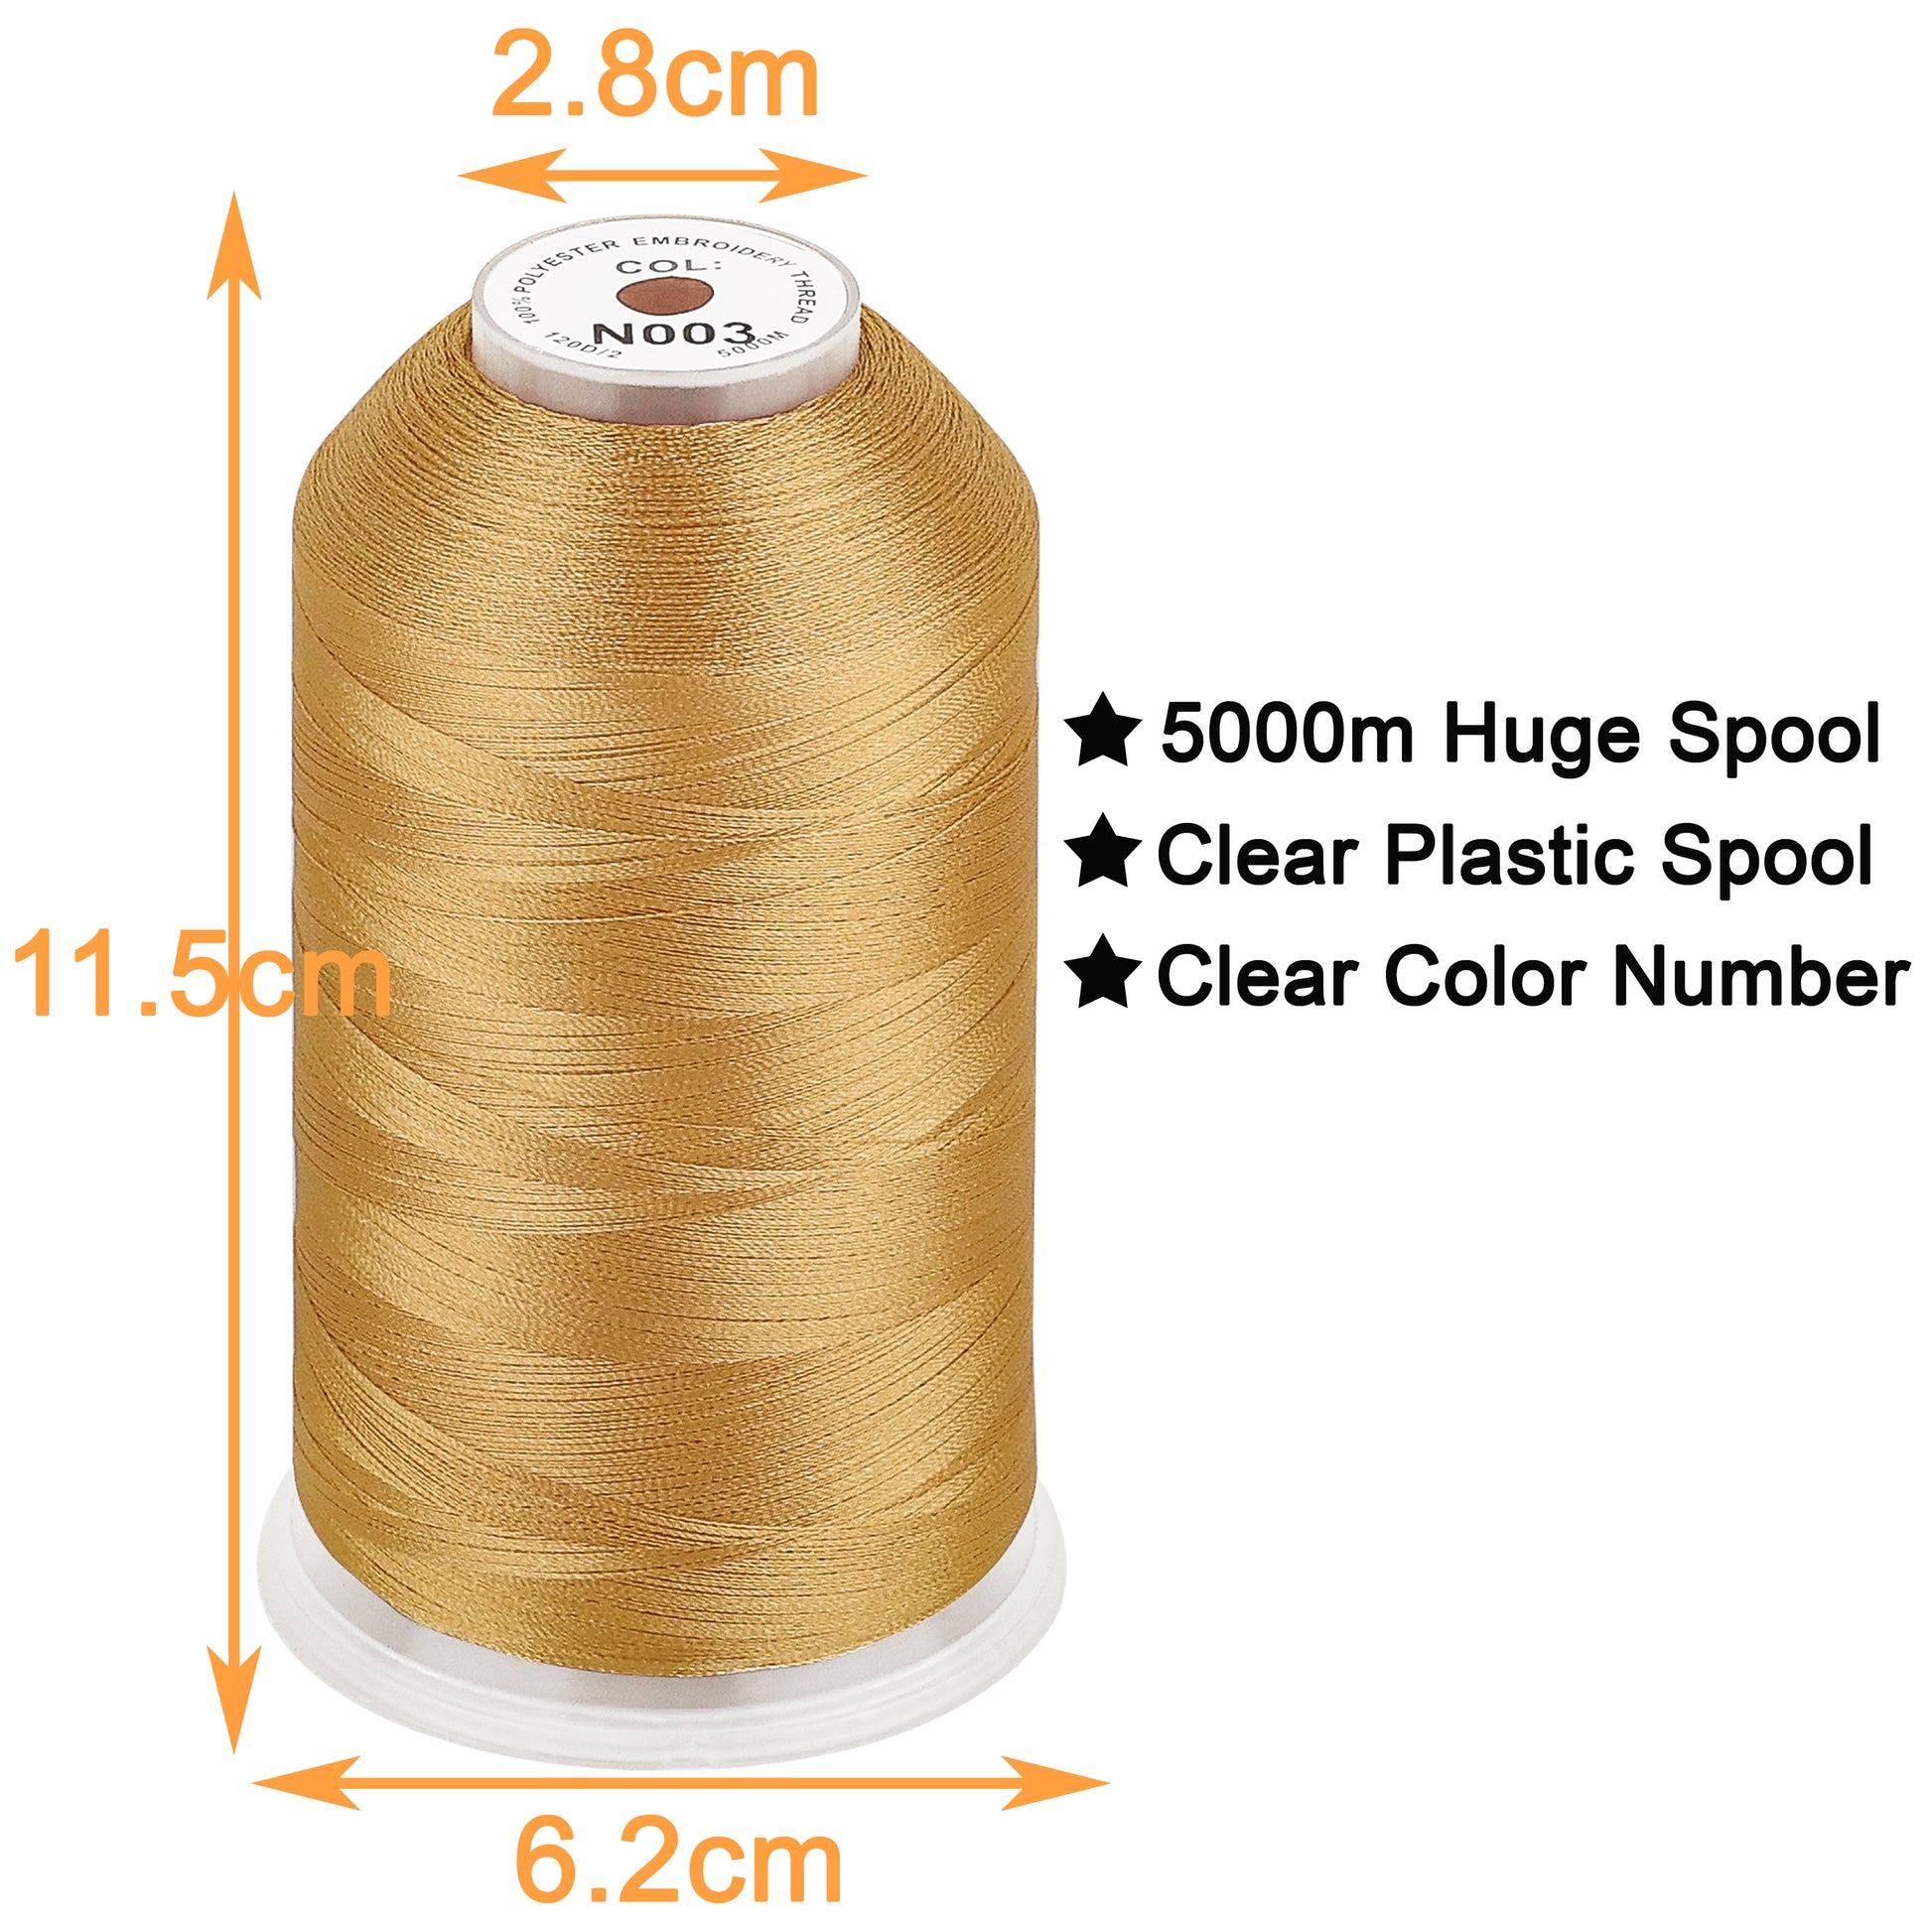 New brothread - 2 Huge Spools 5000M Each Polyester Embroidery Machine  Thread 40WT for Commercial and Domestic Machines - White White-001